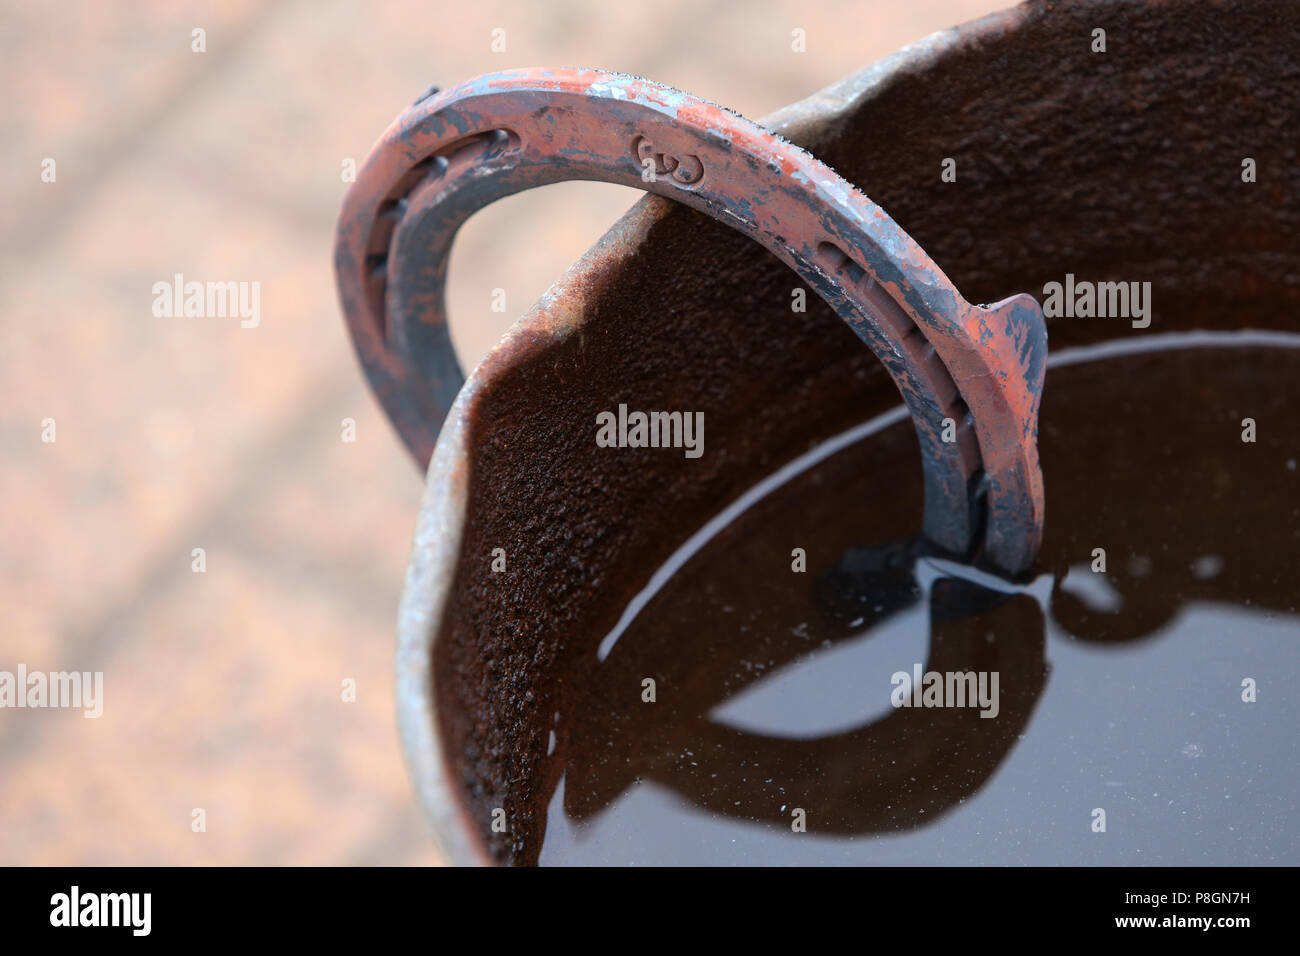 Neustadt (Dosse), heated horseshoe is cooled in a bucket of water Stock Photo